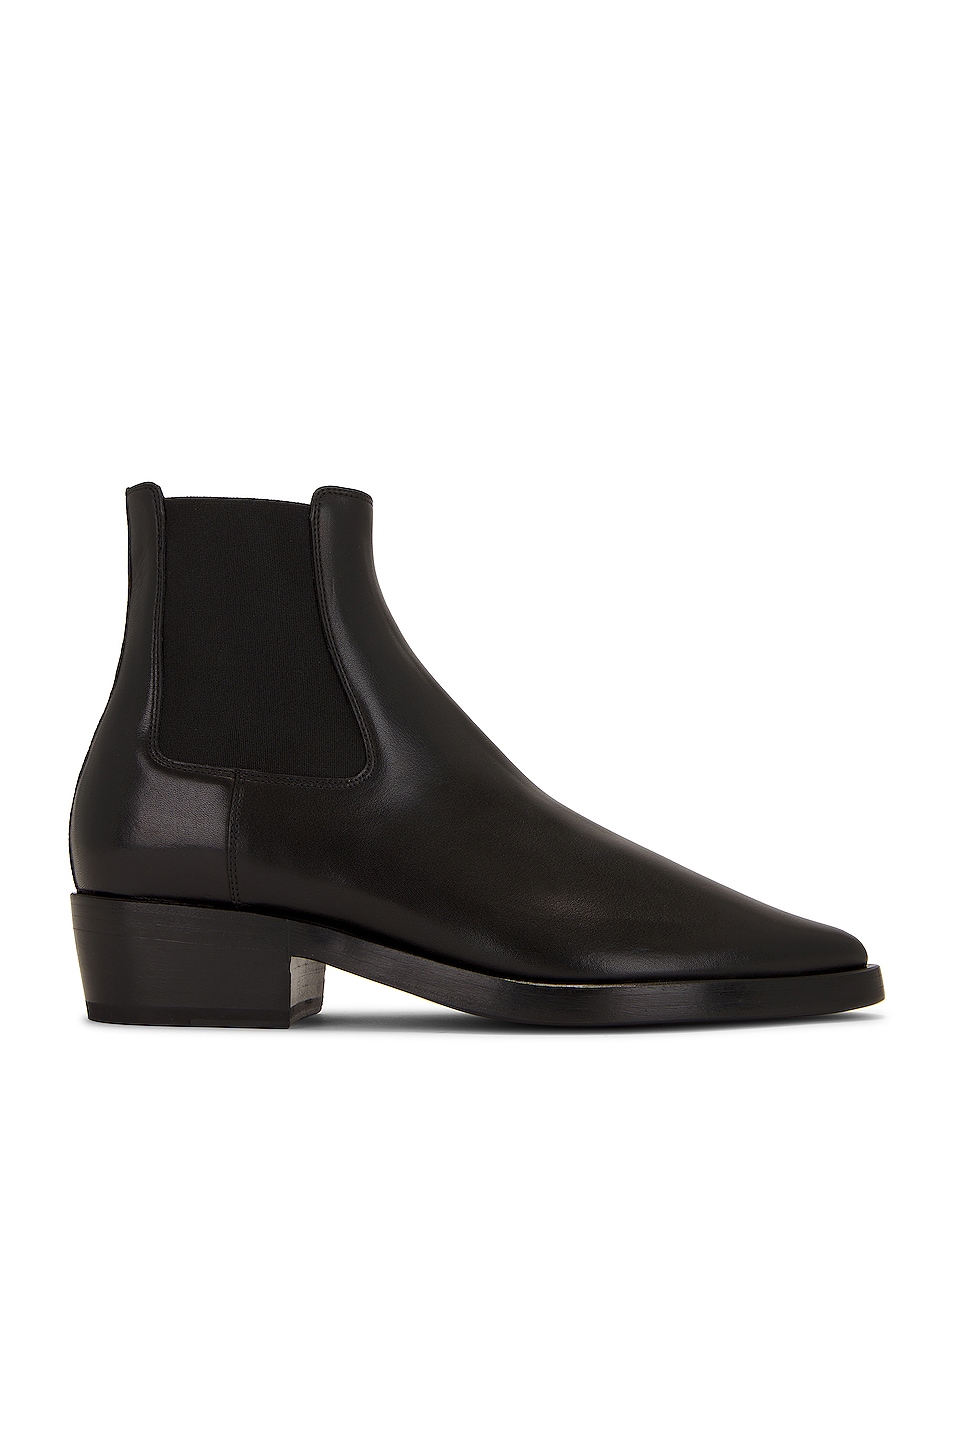 Image 1 of Fear of God Eternal Cowboy Boot in black